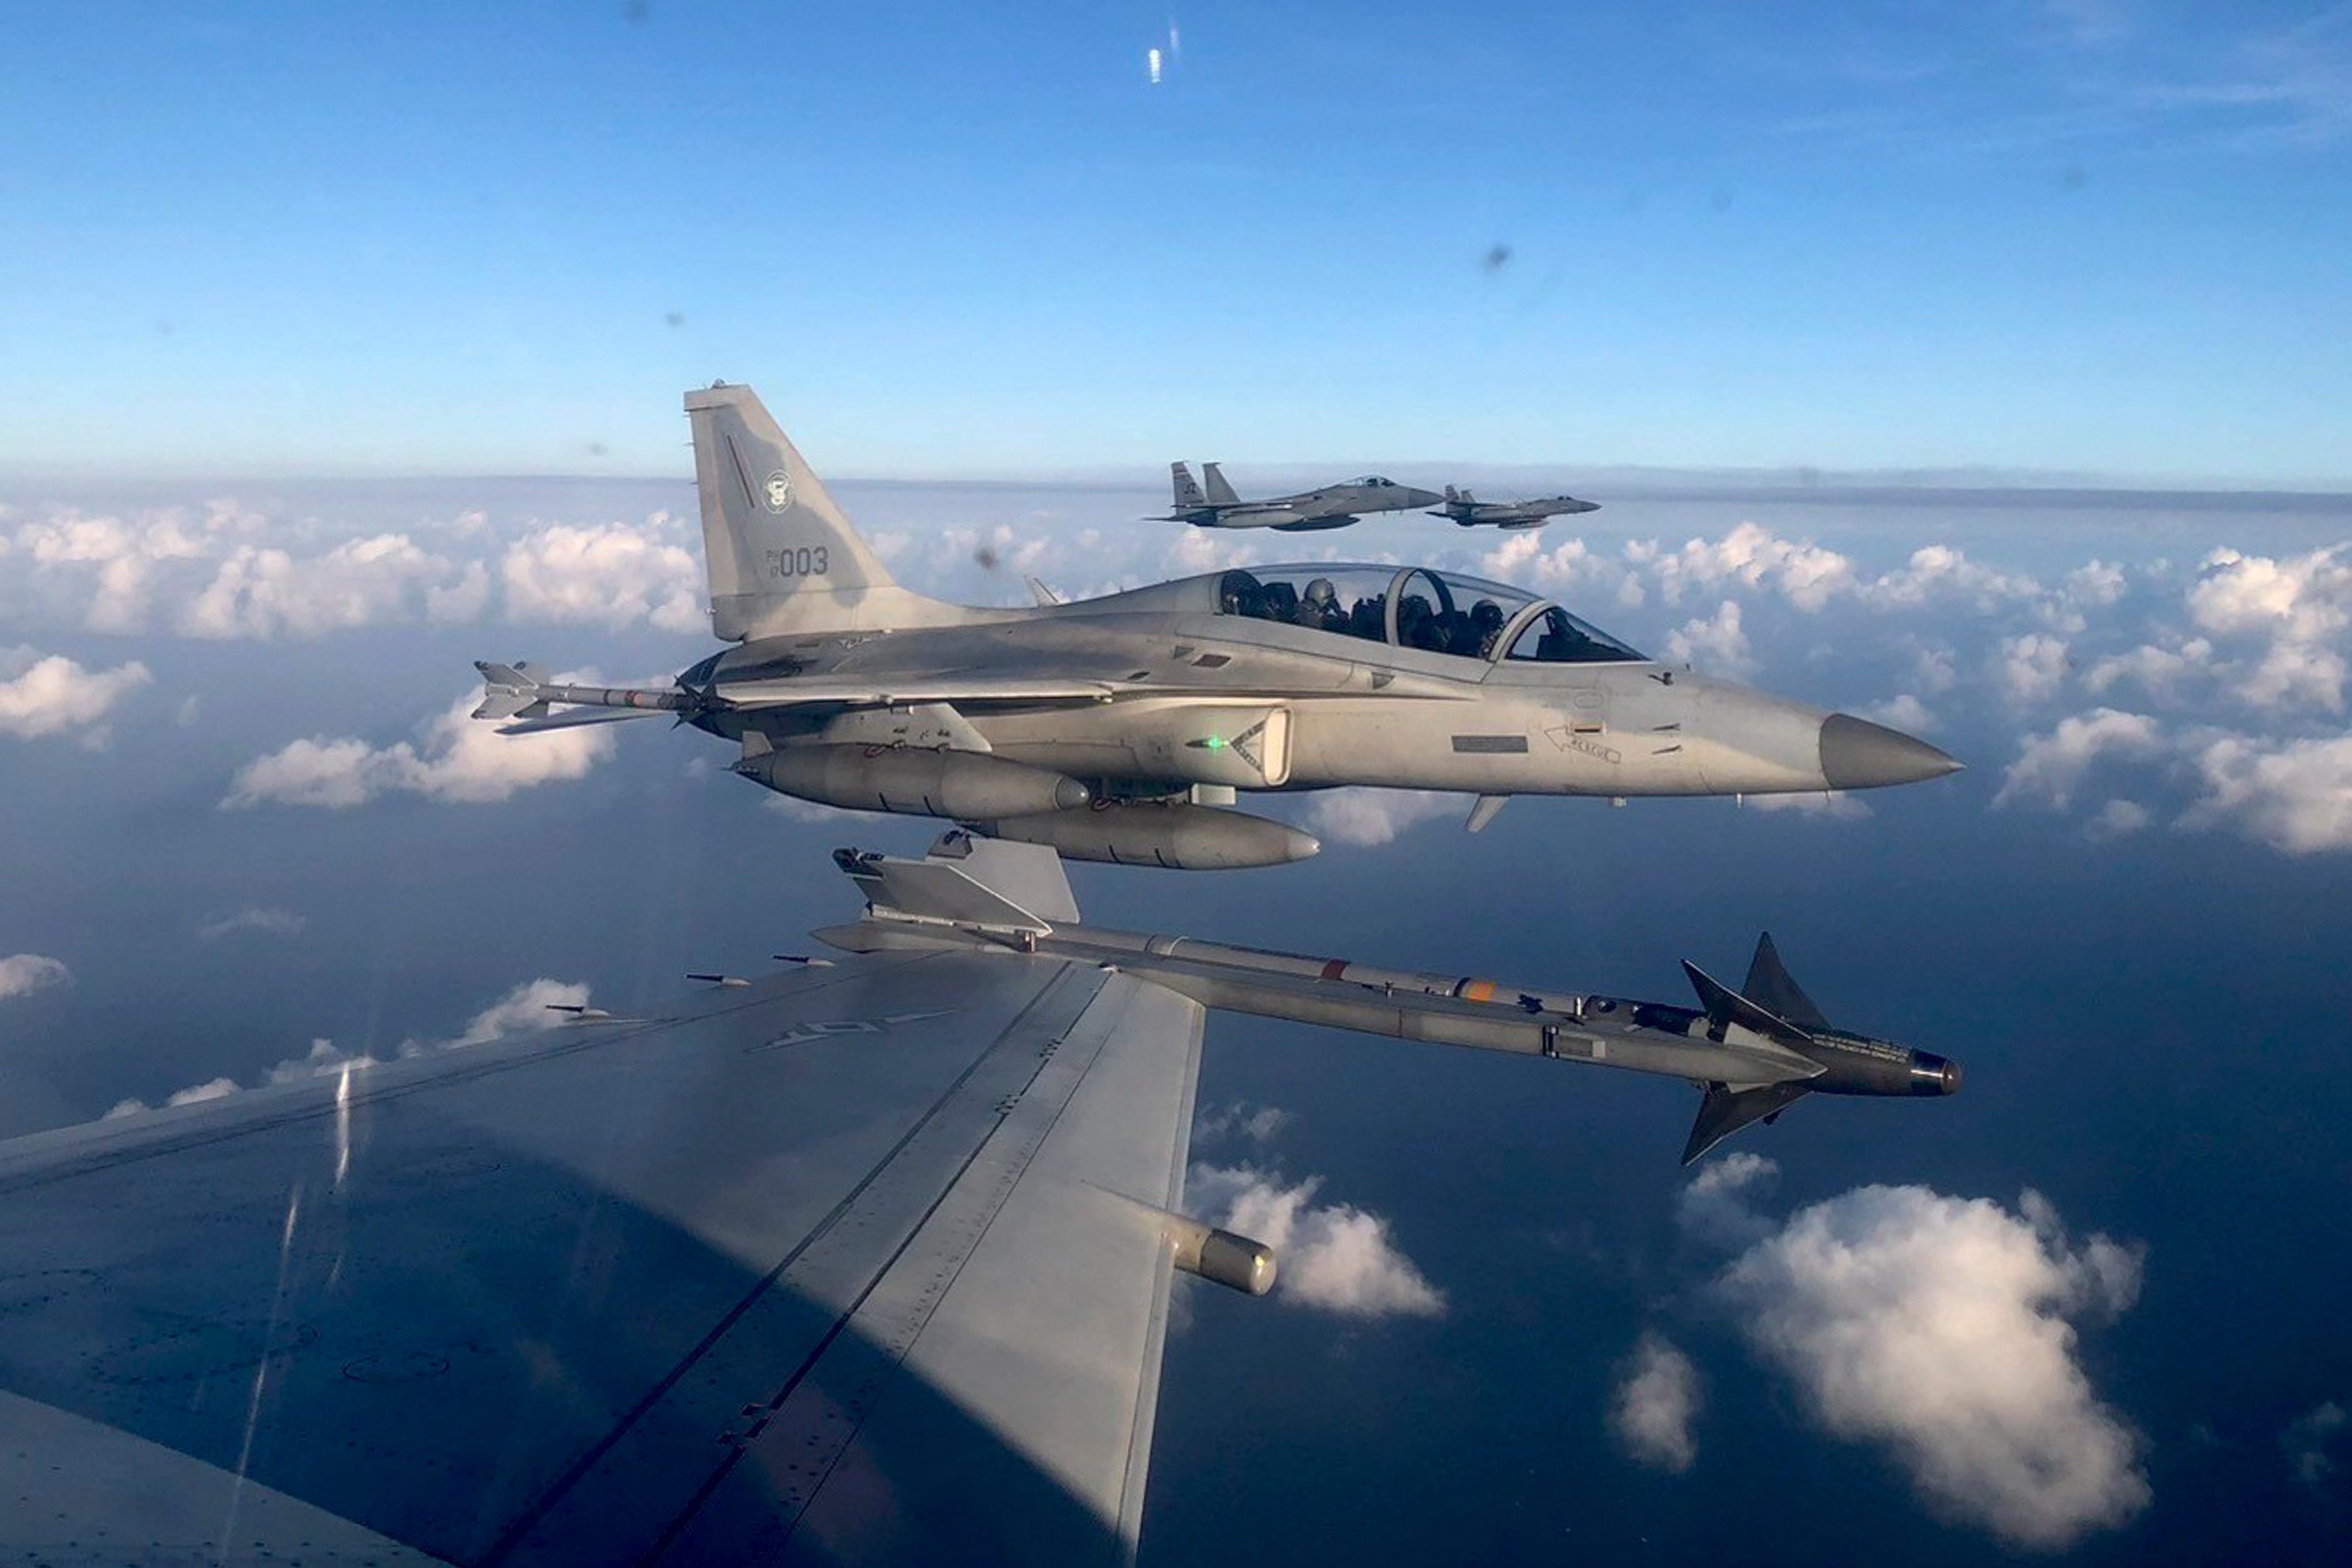 The Philippines plans to modernise its fleet of fighter jets and Swedish company Saab could potentially supply them. Photo: Philippine Air Force via AP